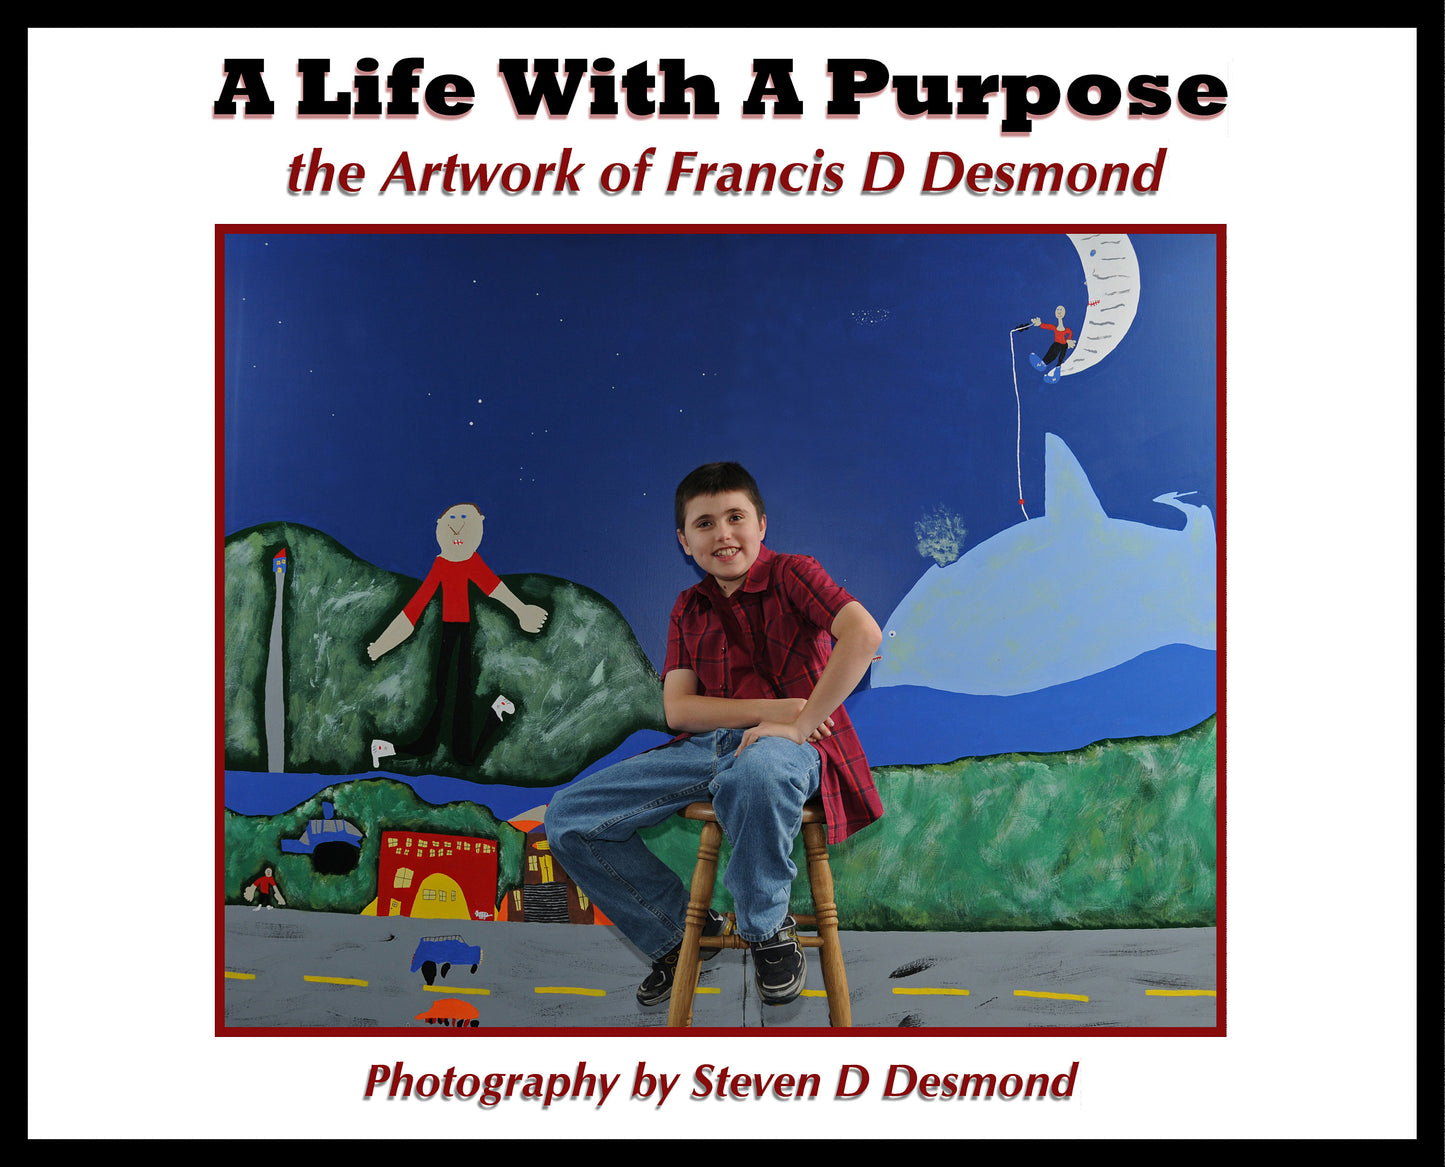 "A Life With A Purpose"